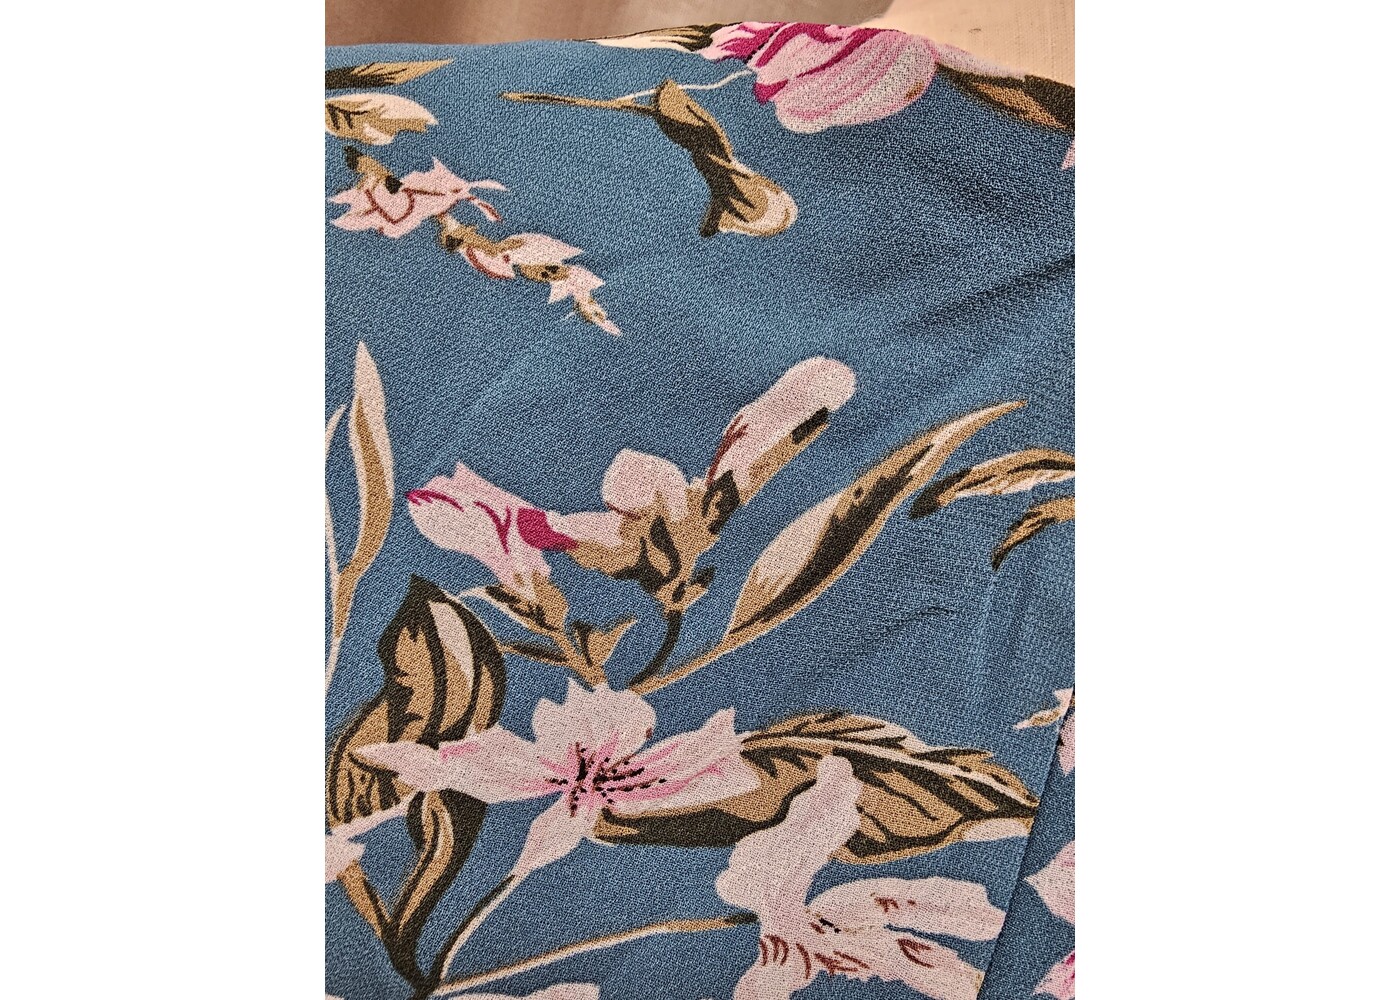 Miss Anne Winona Floral Cocktail Dress